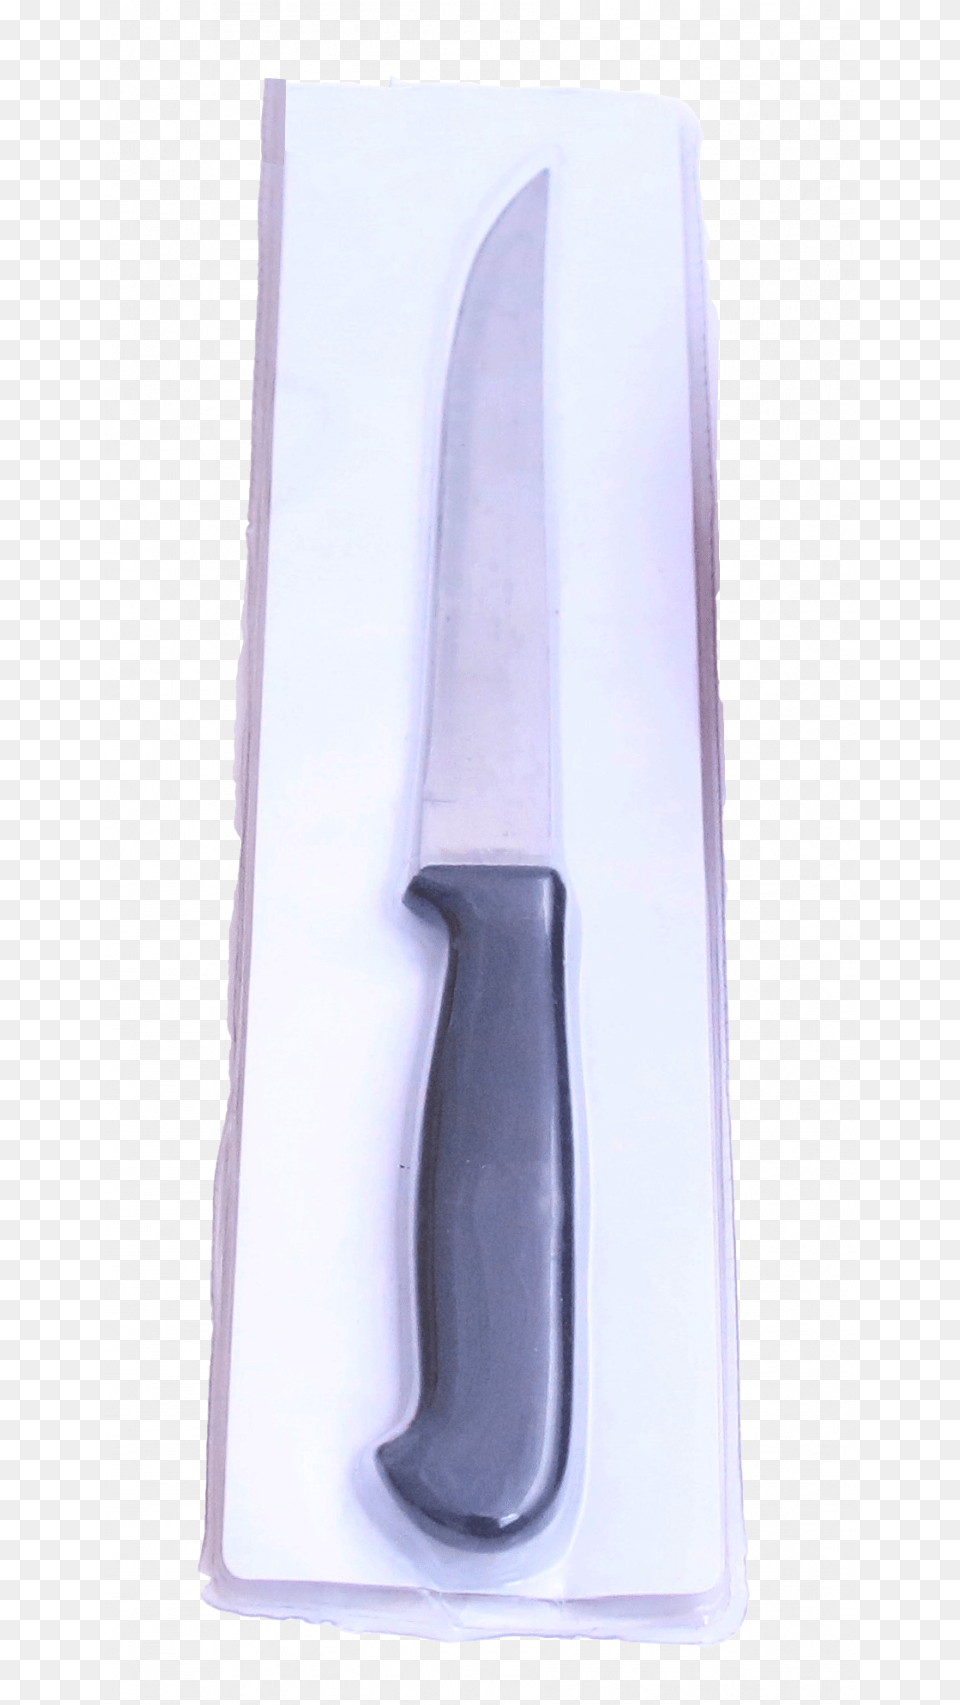 Blade, Cutlery, Weapon, Knife, Dagger Png Image